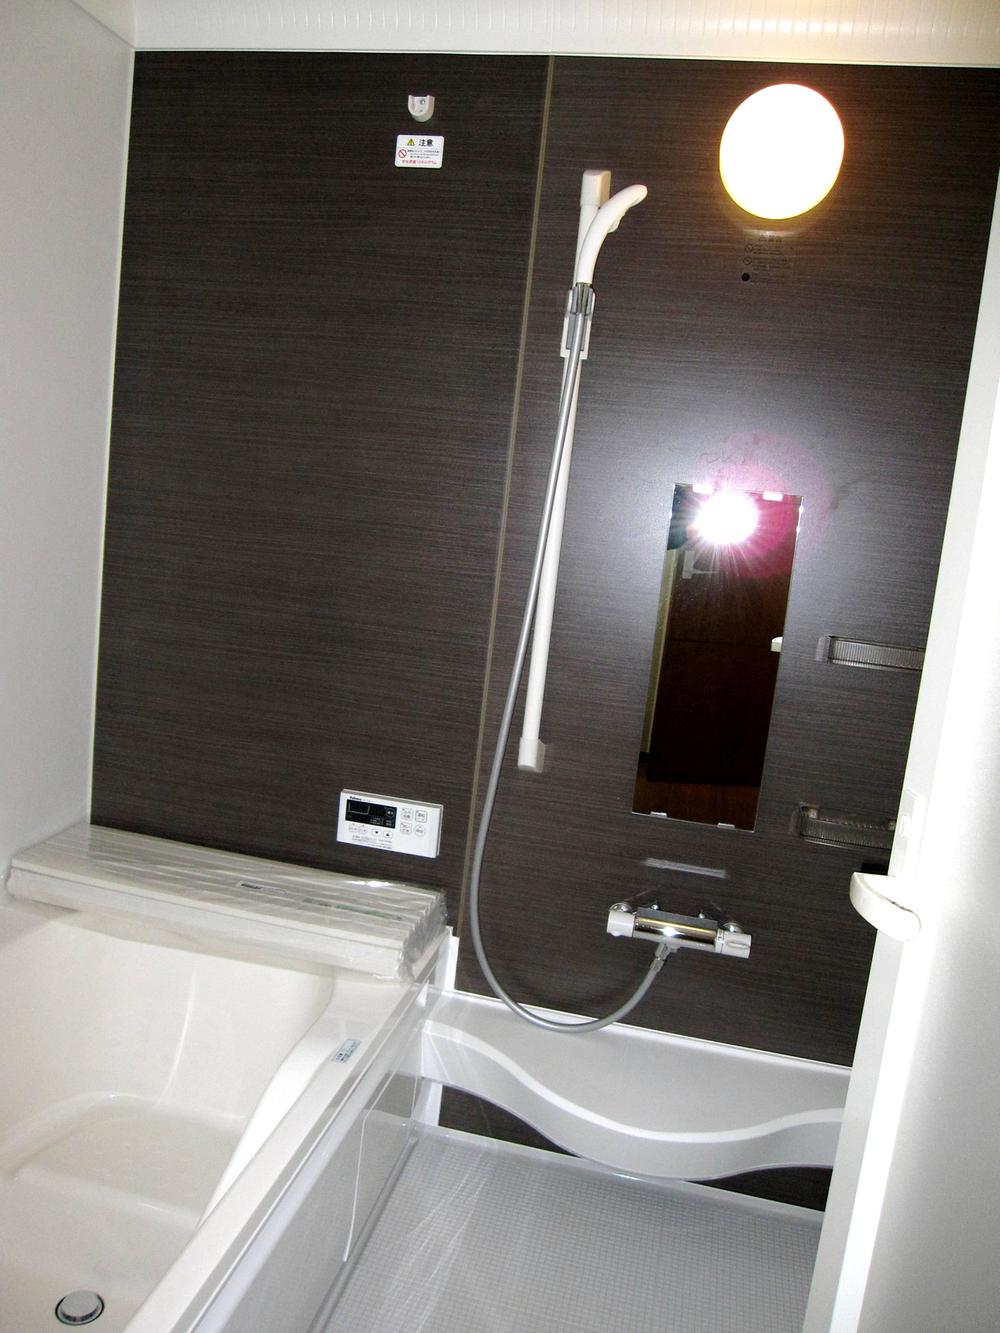 Bathroom. Unit bus with a bathroom heater impressions function (1 tsubo type)